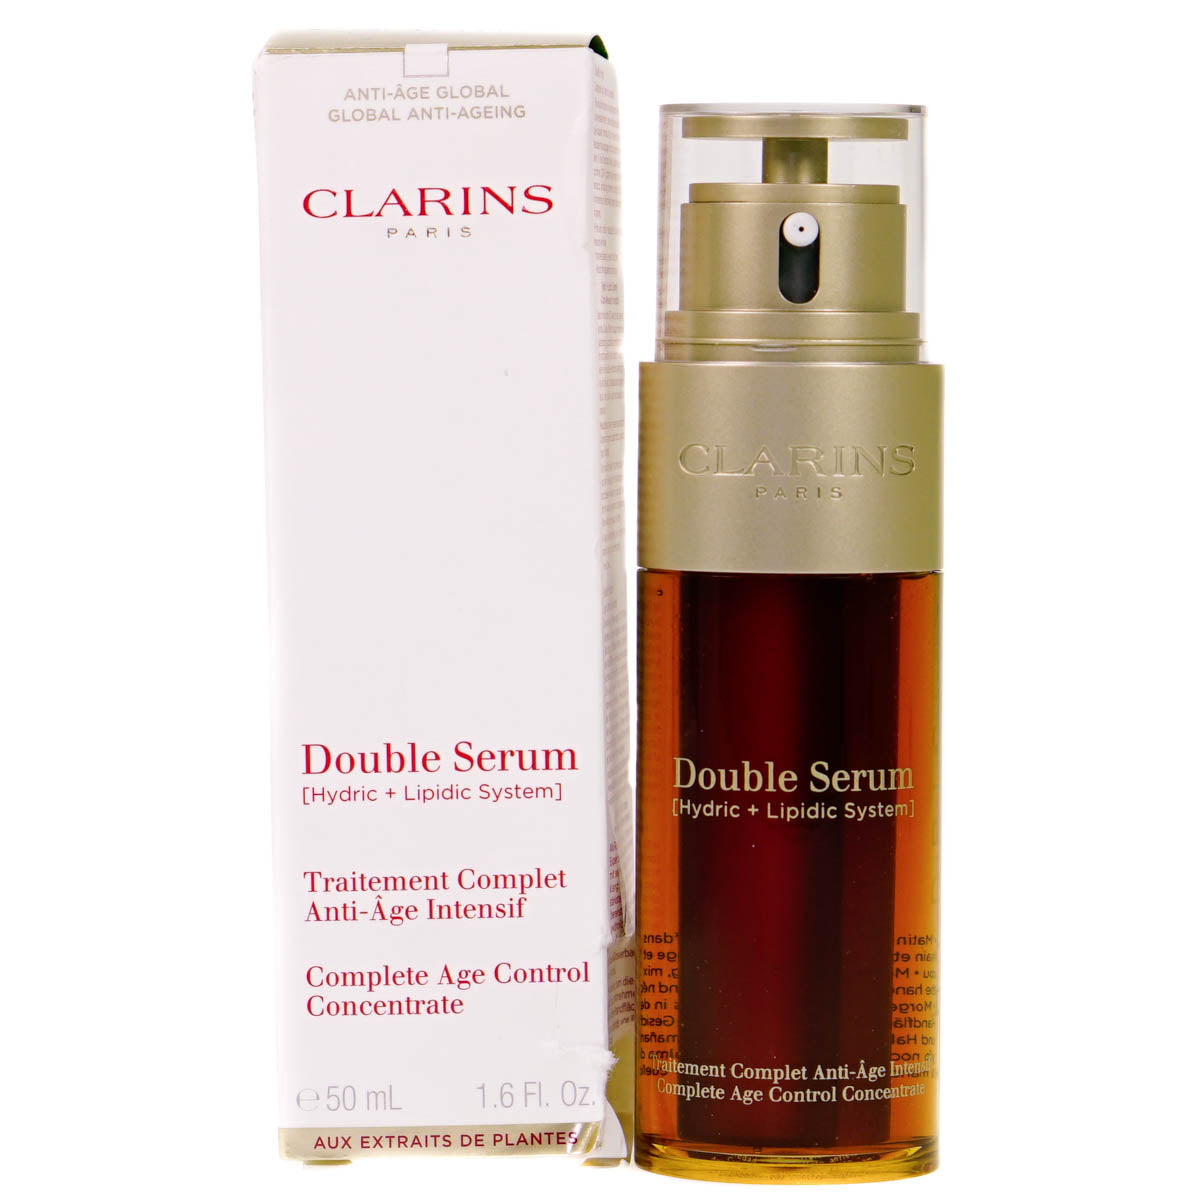 Clarins Double Serum Age Control Concentrate 50ml (Blemished Box)